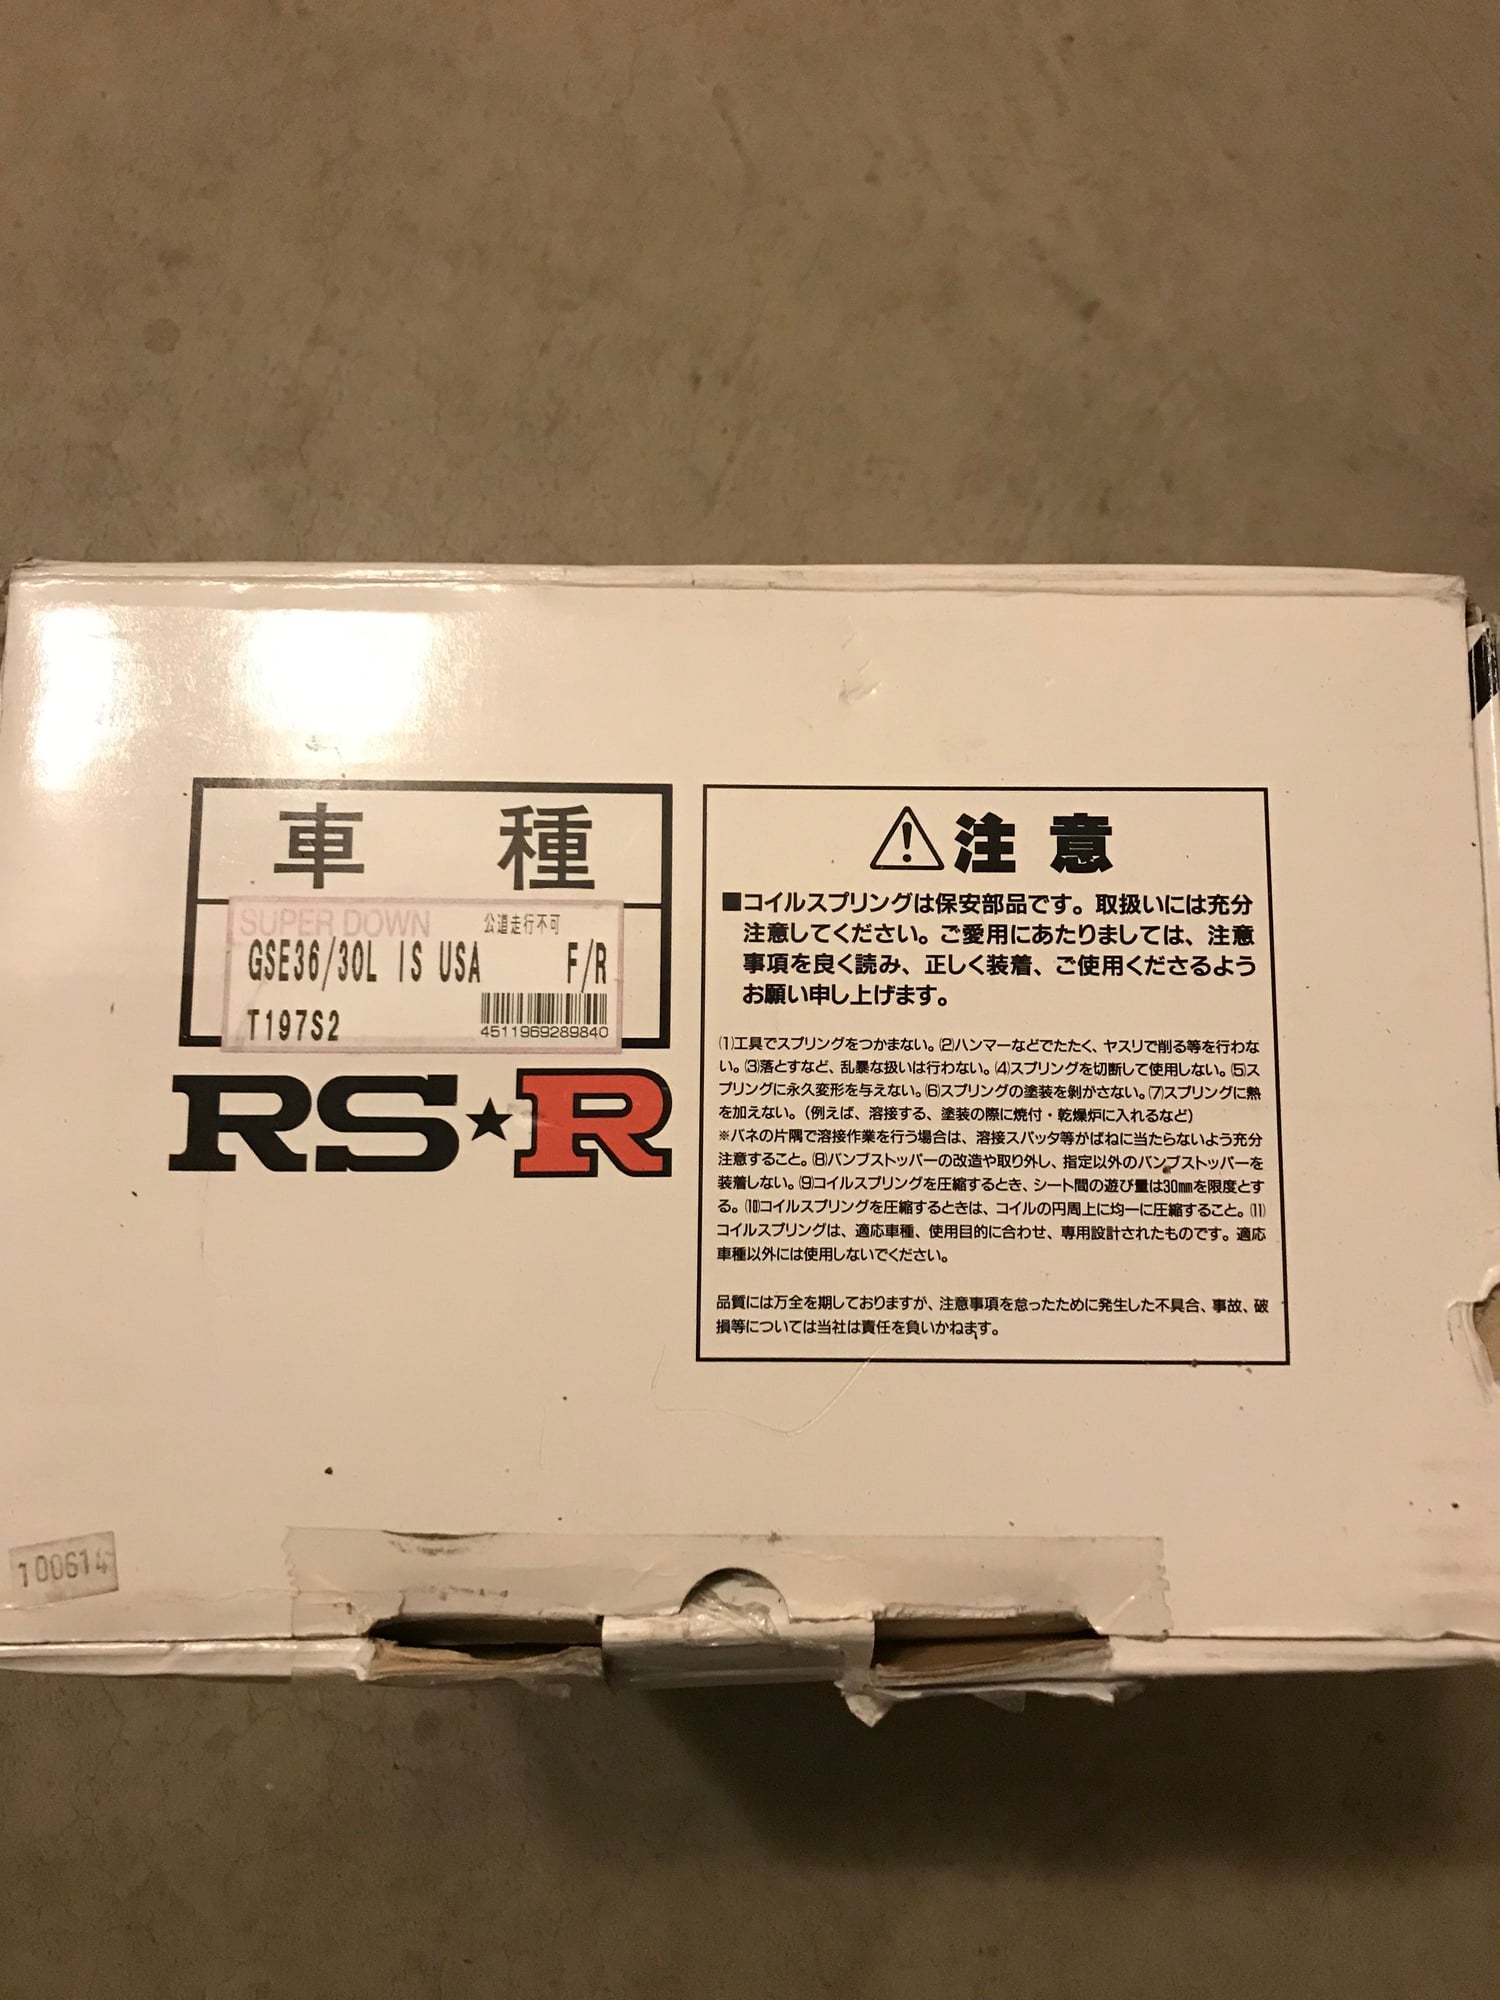 Steering/Suspension - RSR Super Down Springs - Used - 2014 to 2018 Lexus IS350 - San Diego, CA 92124, United States